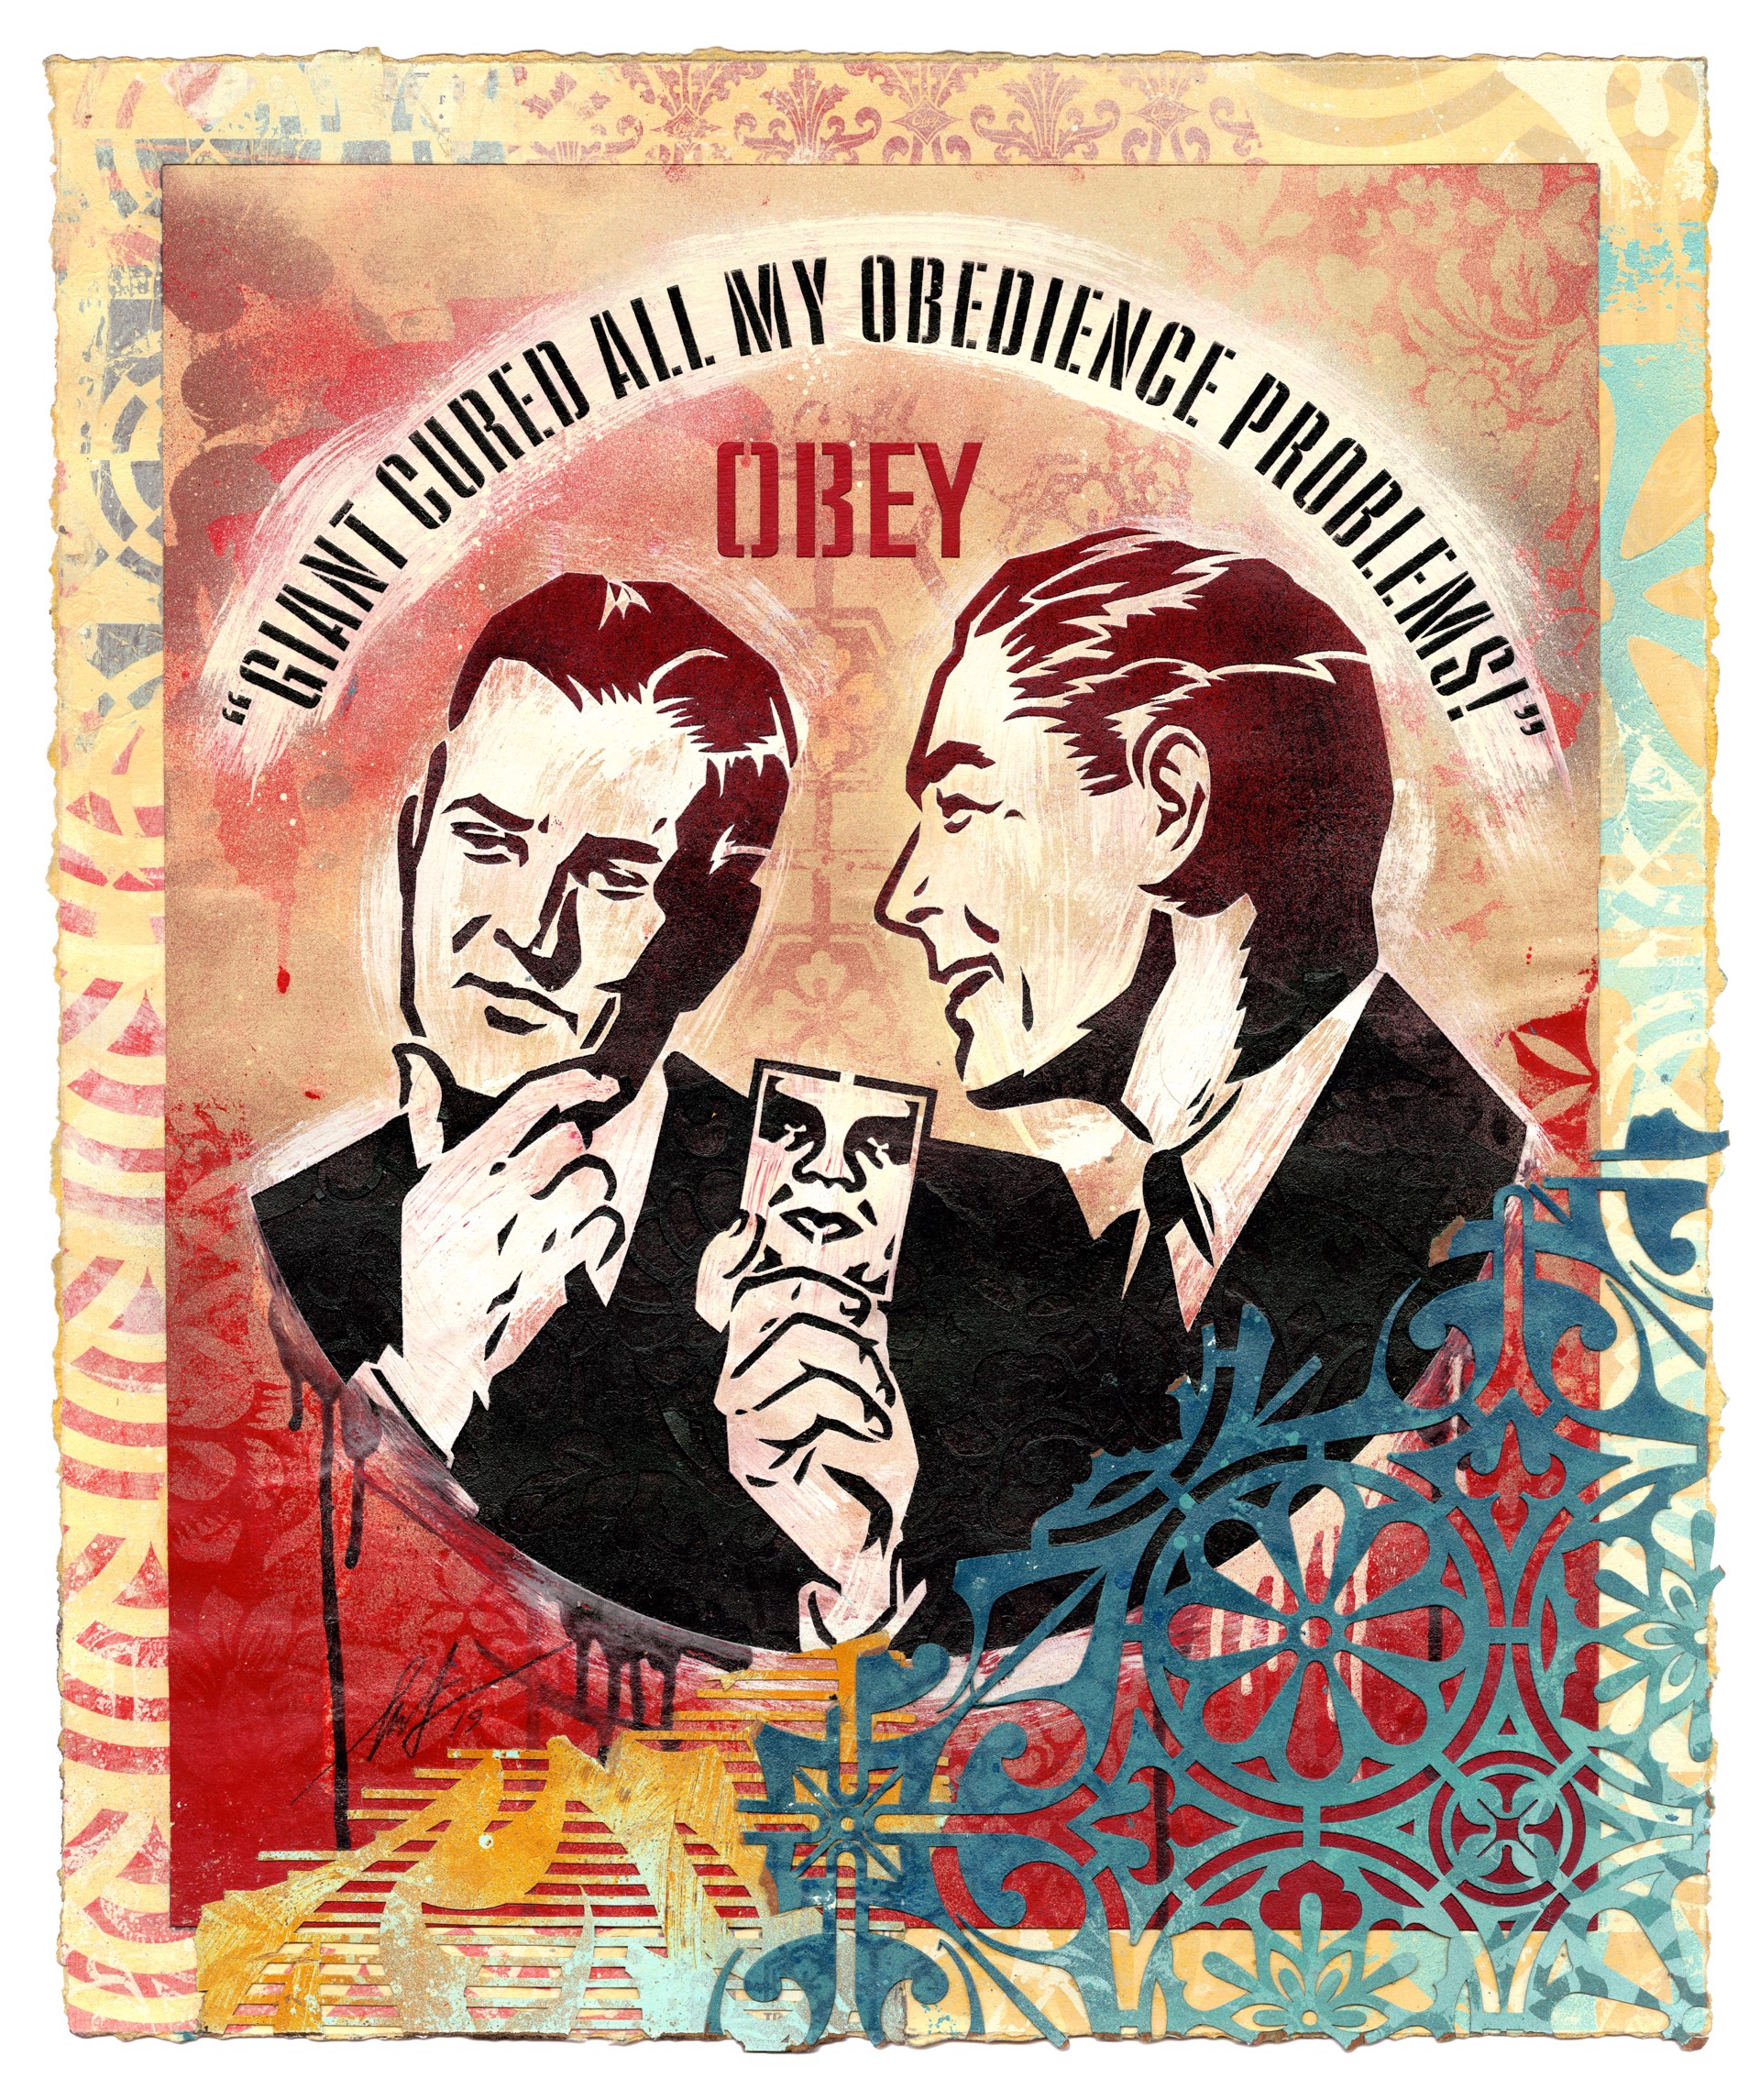 Obedience Problems by Shepard Fairey